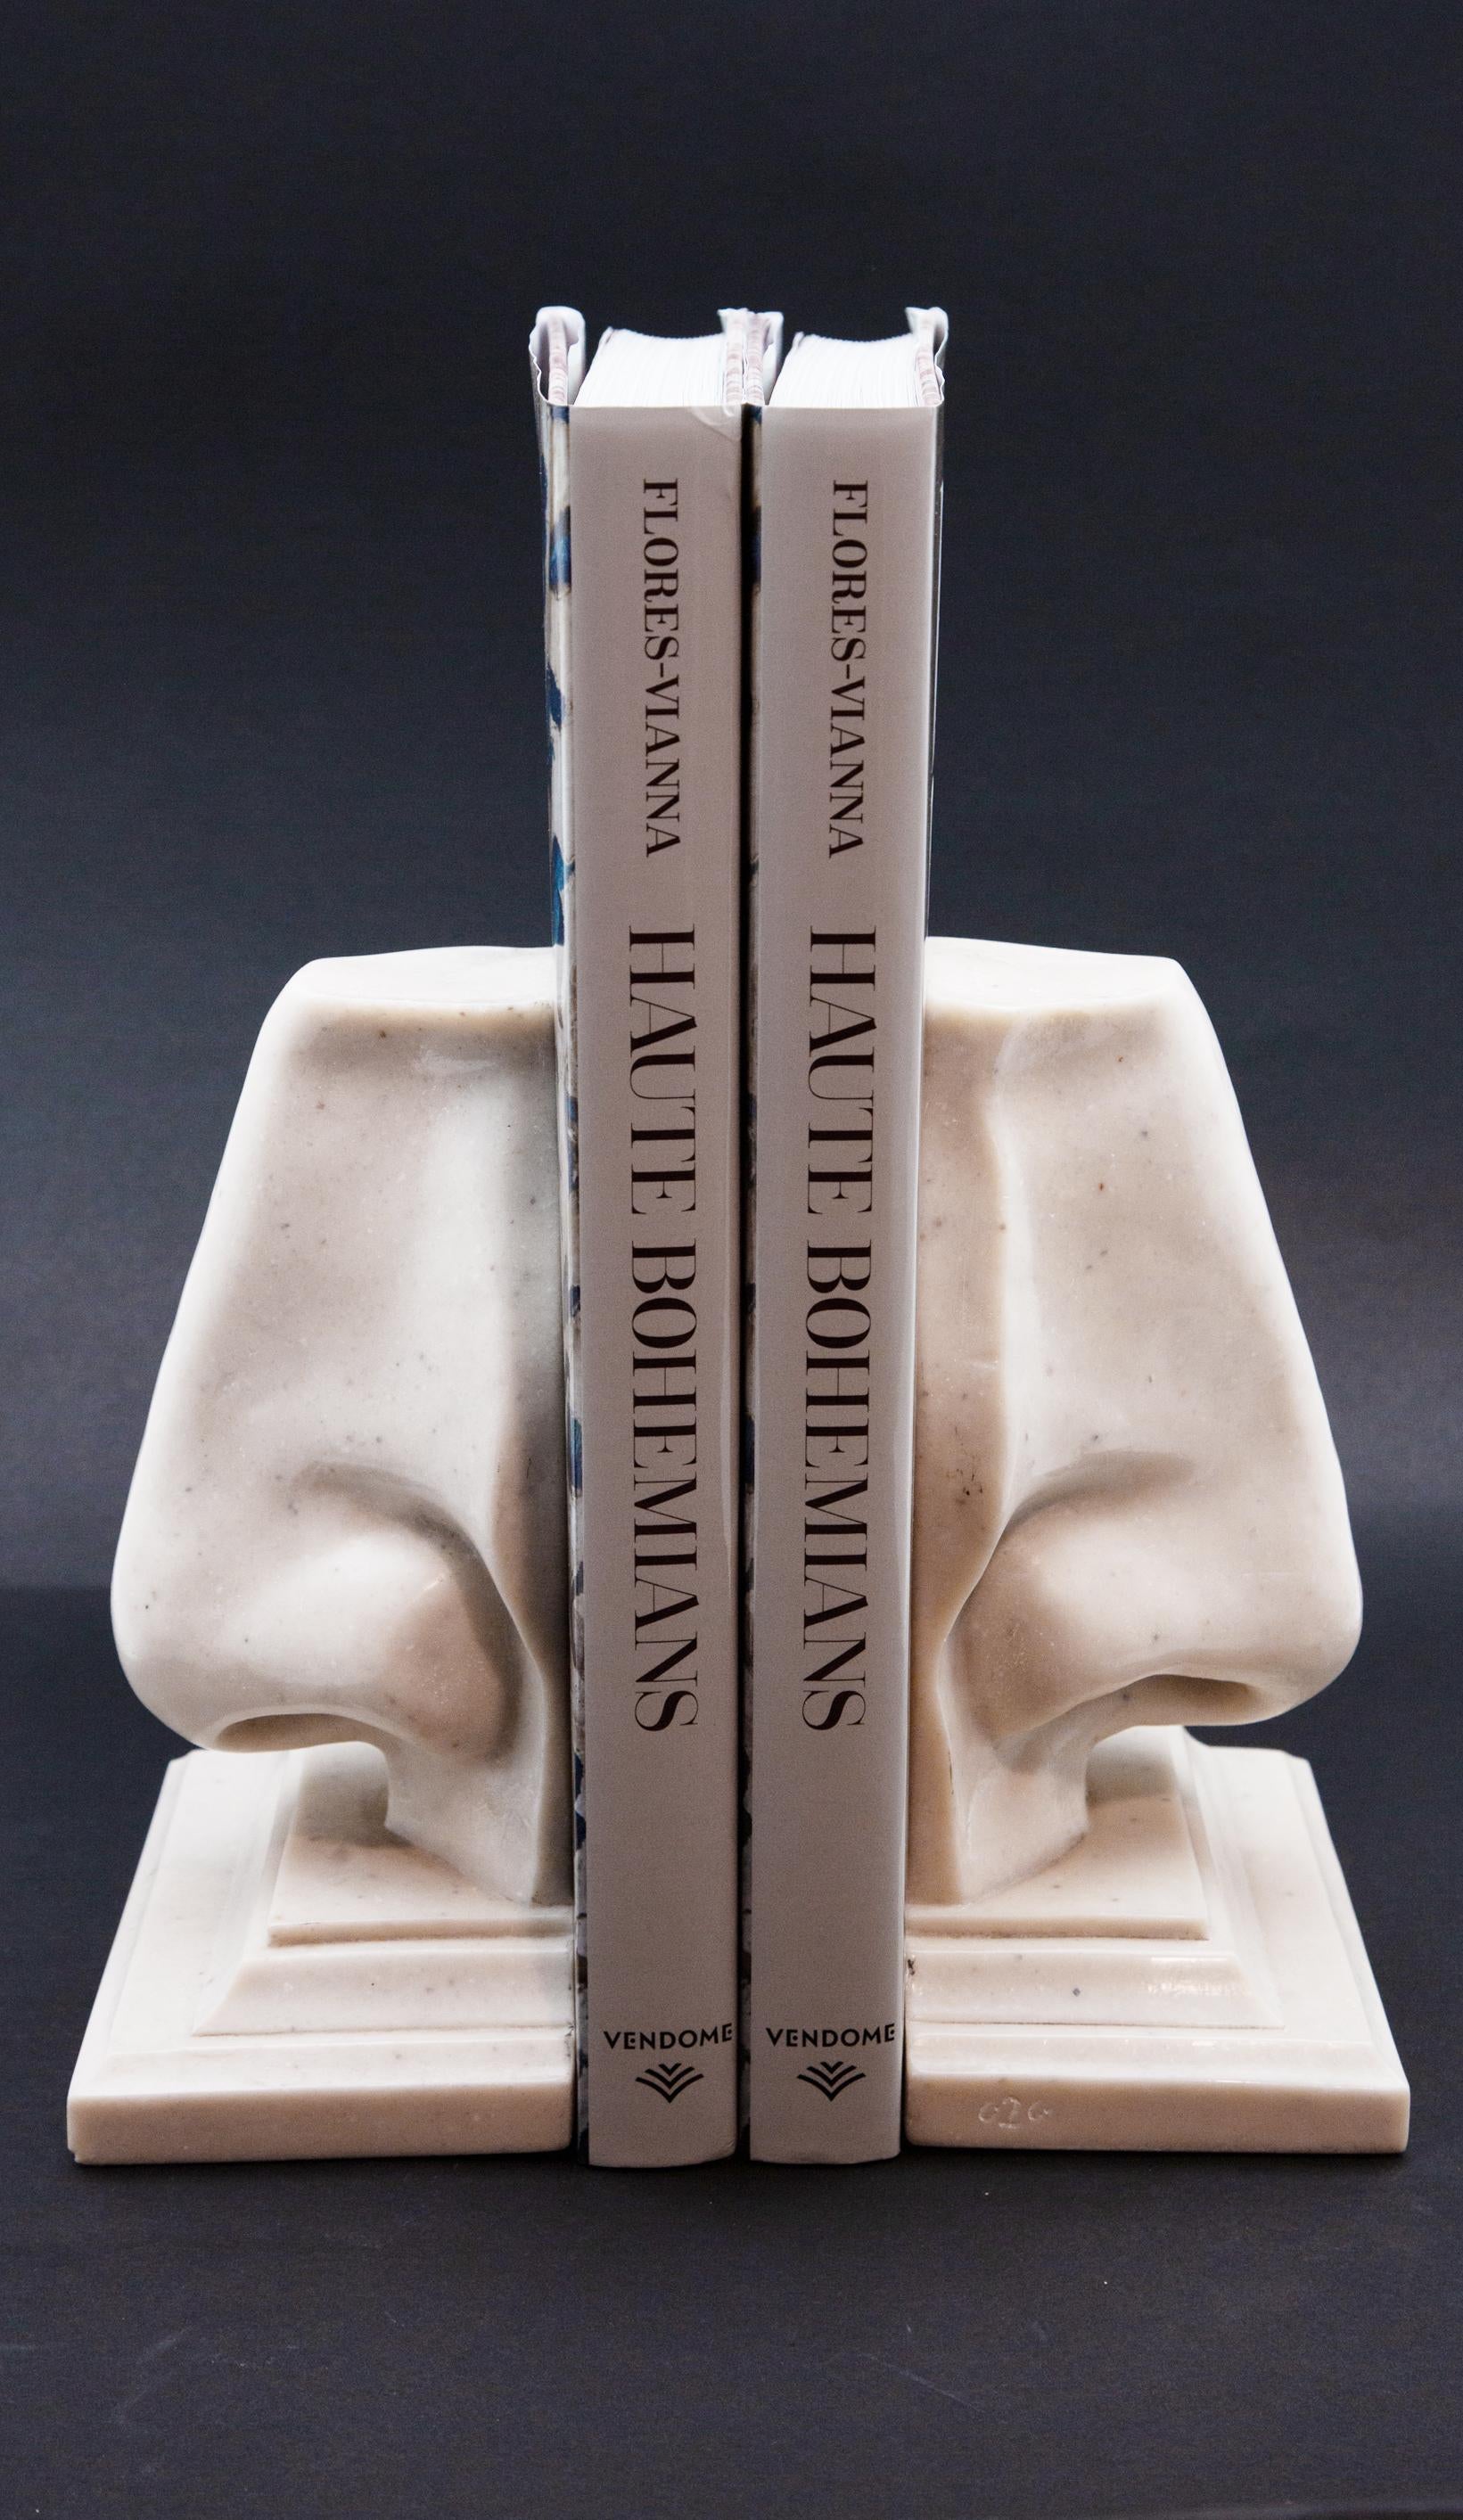 Pair of nose-shaped bookends. Made from resin that appears like white marble. 8.75 inches tall, 6.25 inches wide, 3.75 inches deep.